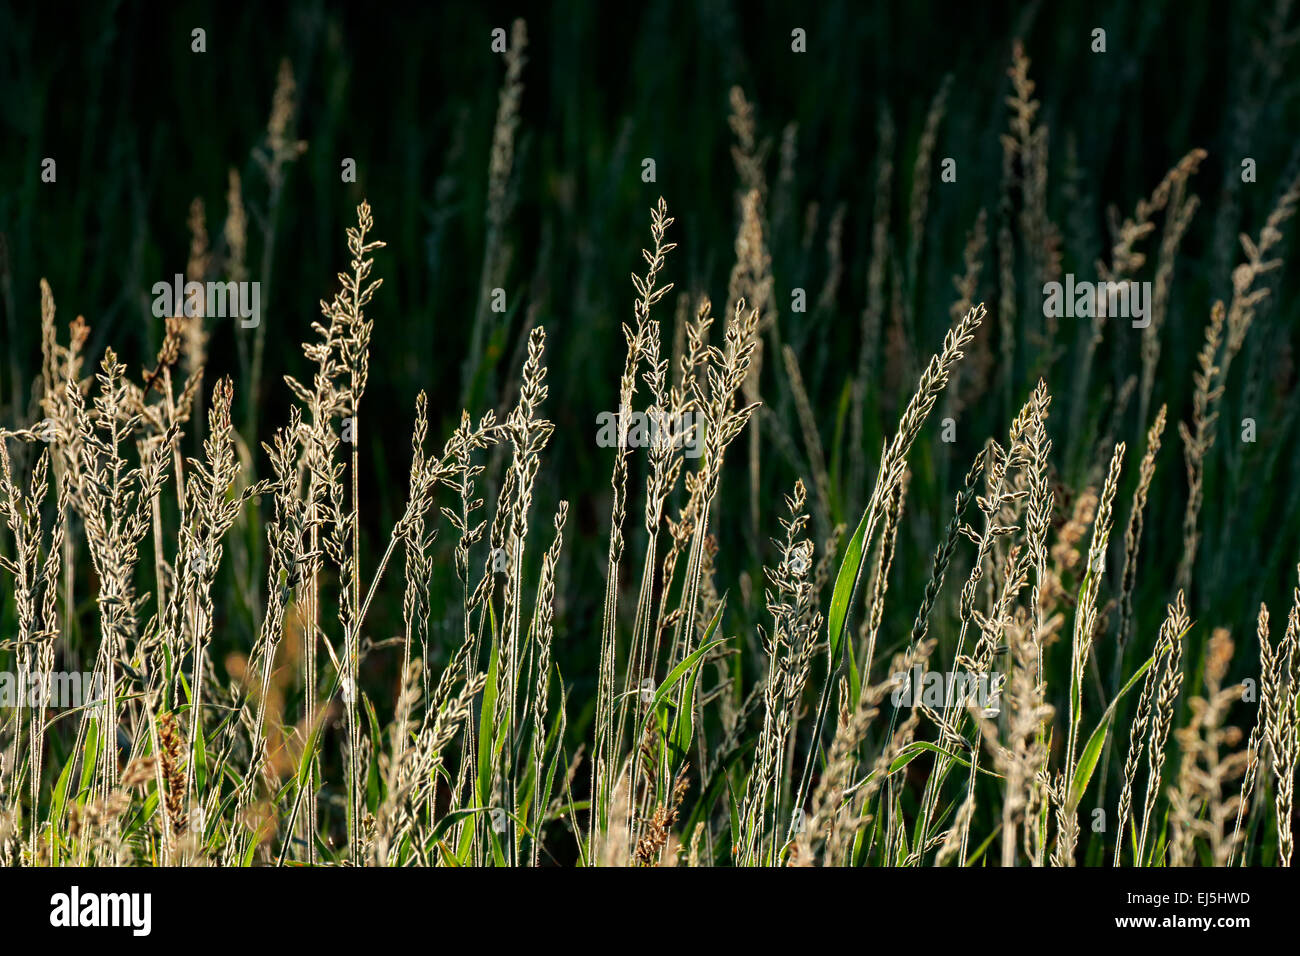 Silver grasses in early morning light Stock Photo